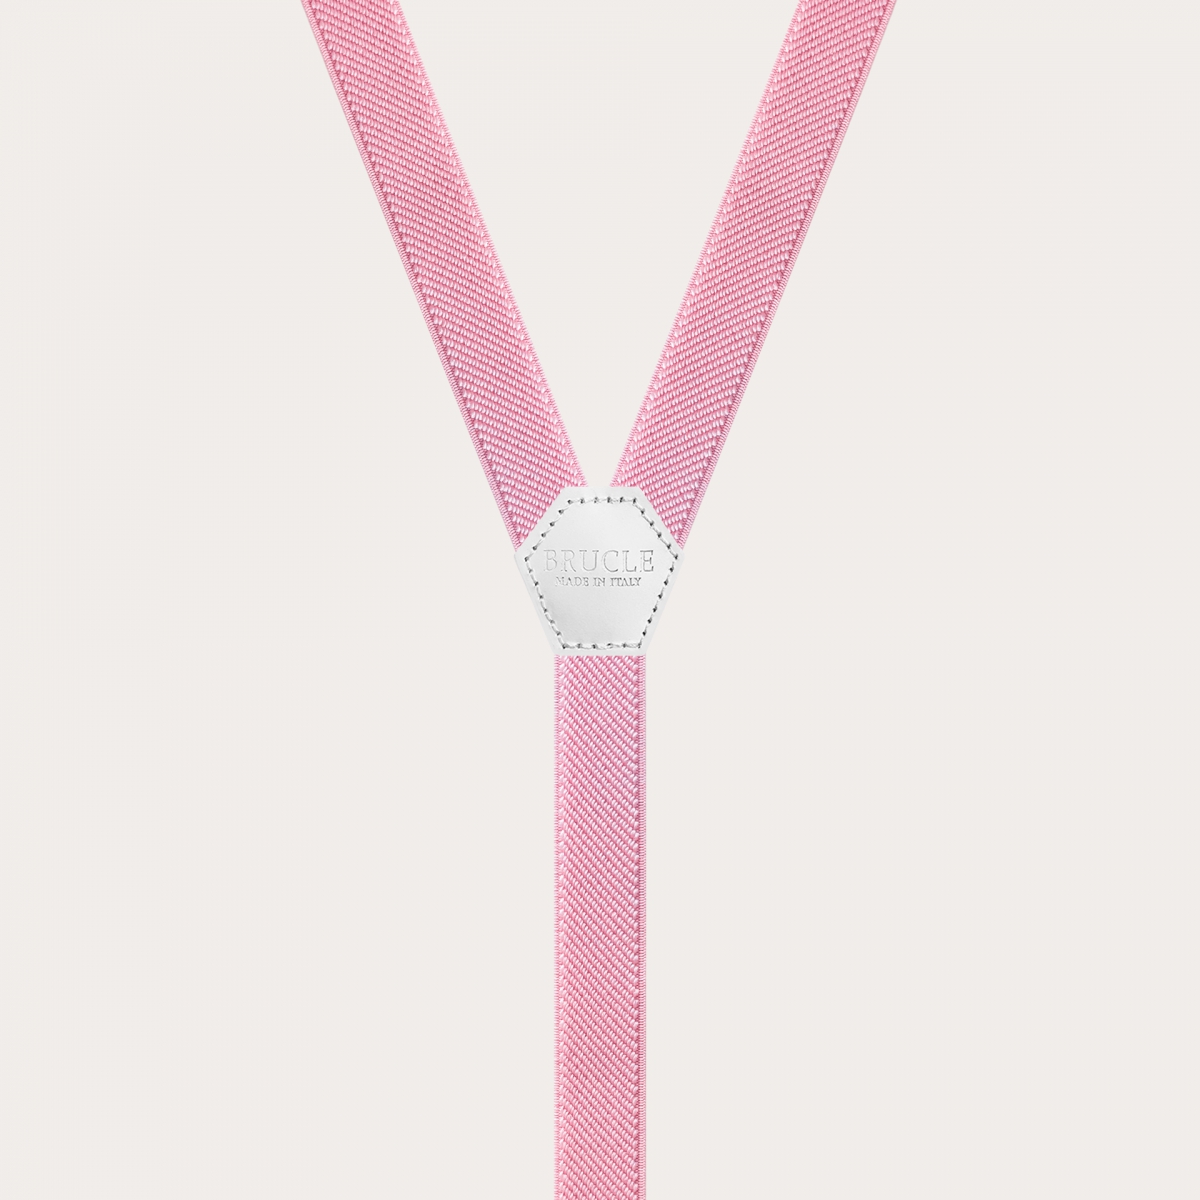 BRUCLE Refined suspenders for boys and girls, pastel pink